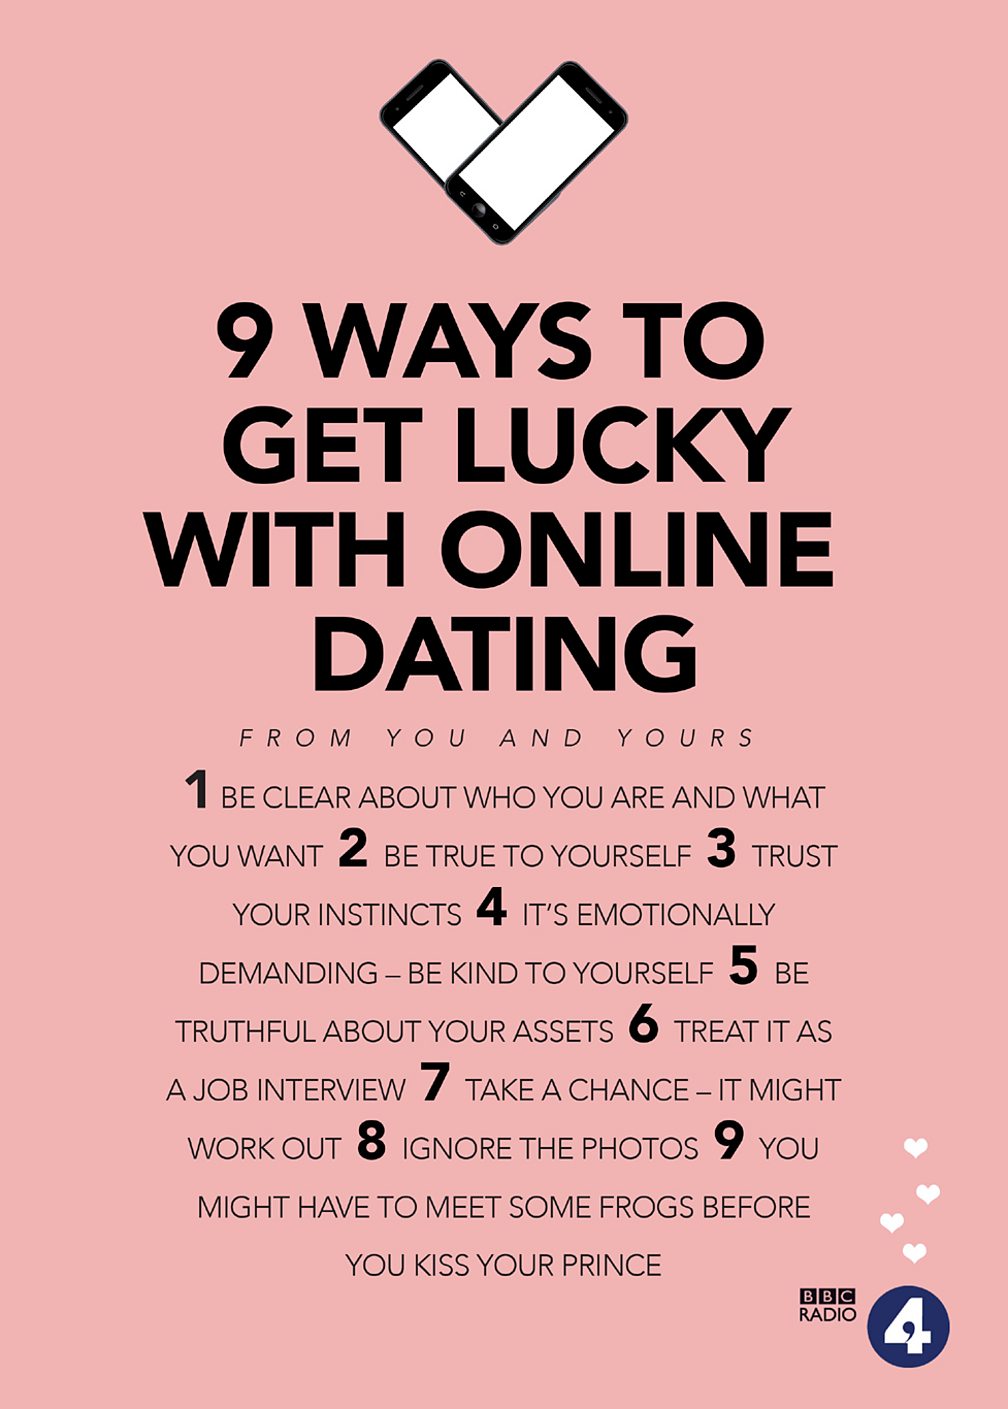 Important tips for online dating success